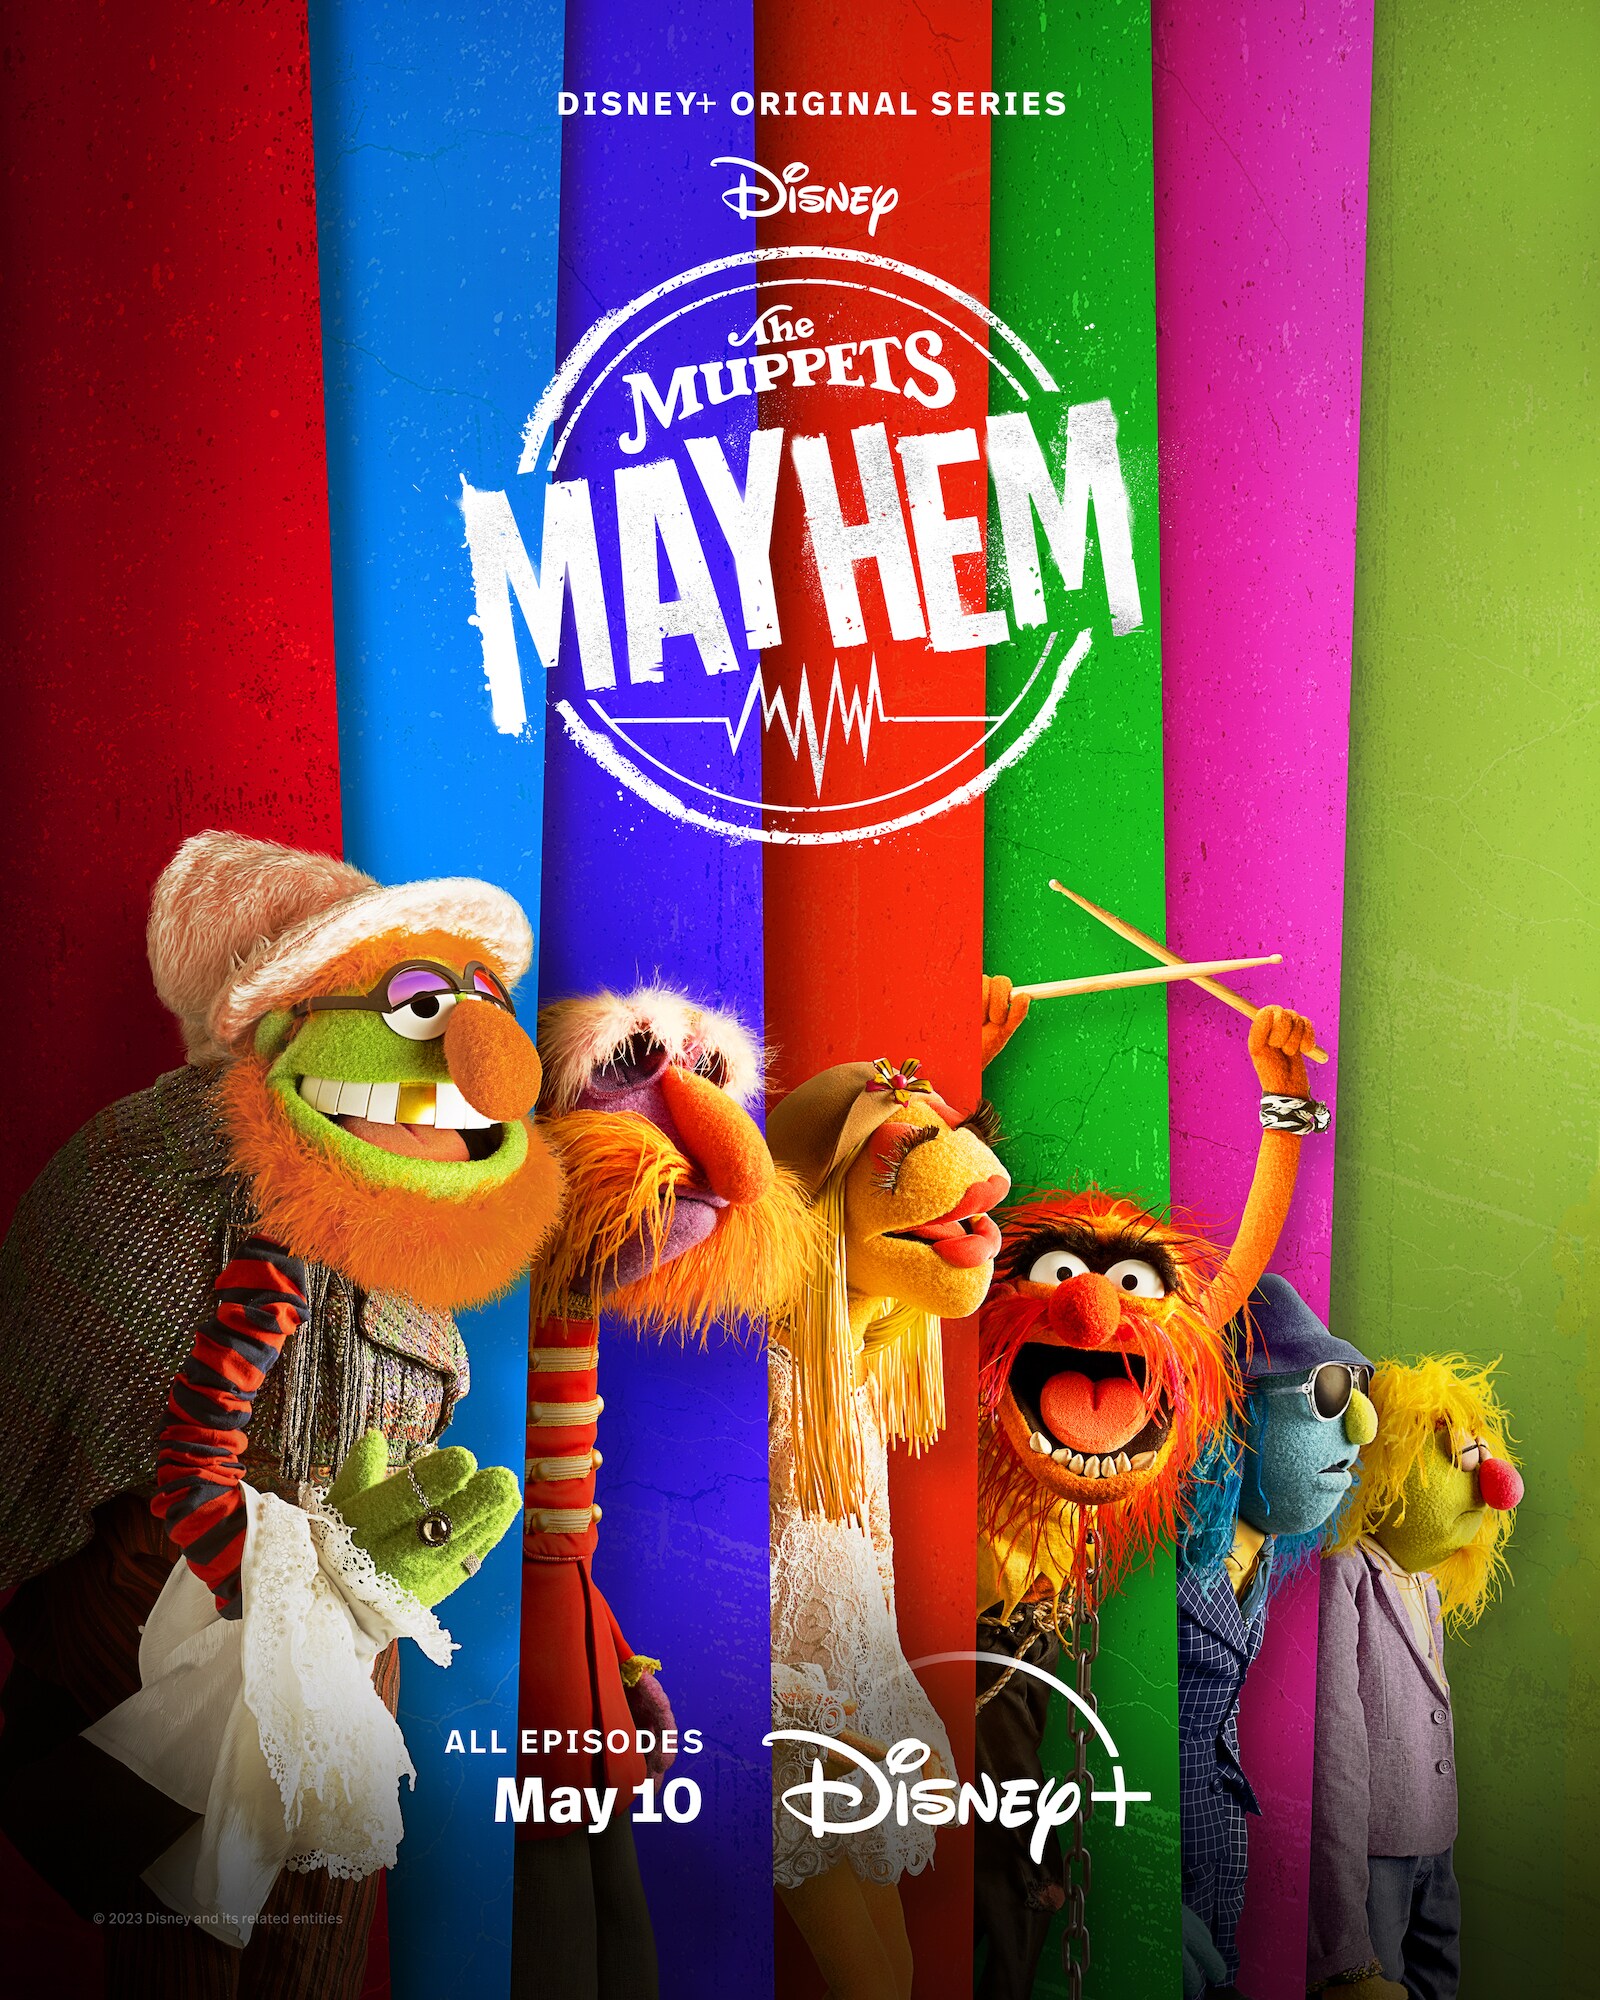 Prepare To Rock Out With The Electric Mayhem Band! Musical Comedy 'The  Muppets Mayhem' Debuts May 10 On Disney+ Series Art & Teaser Now Available